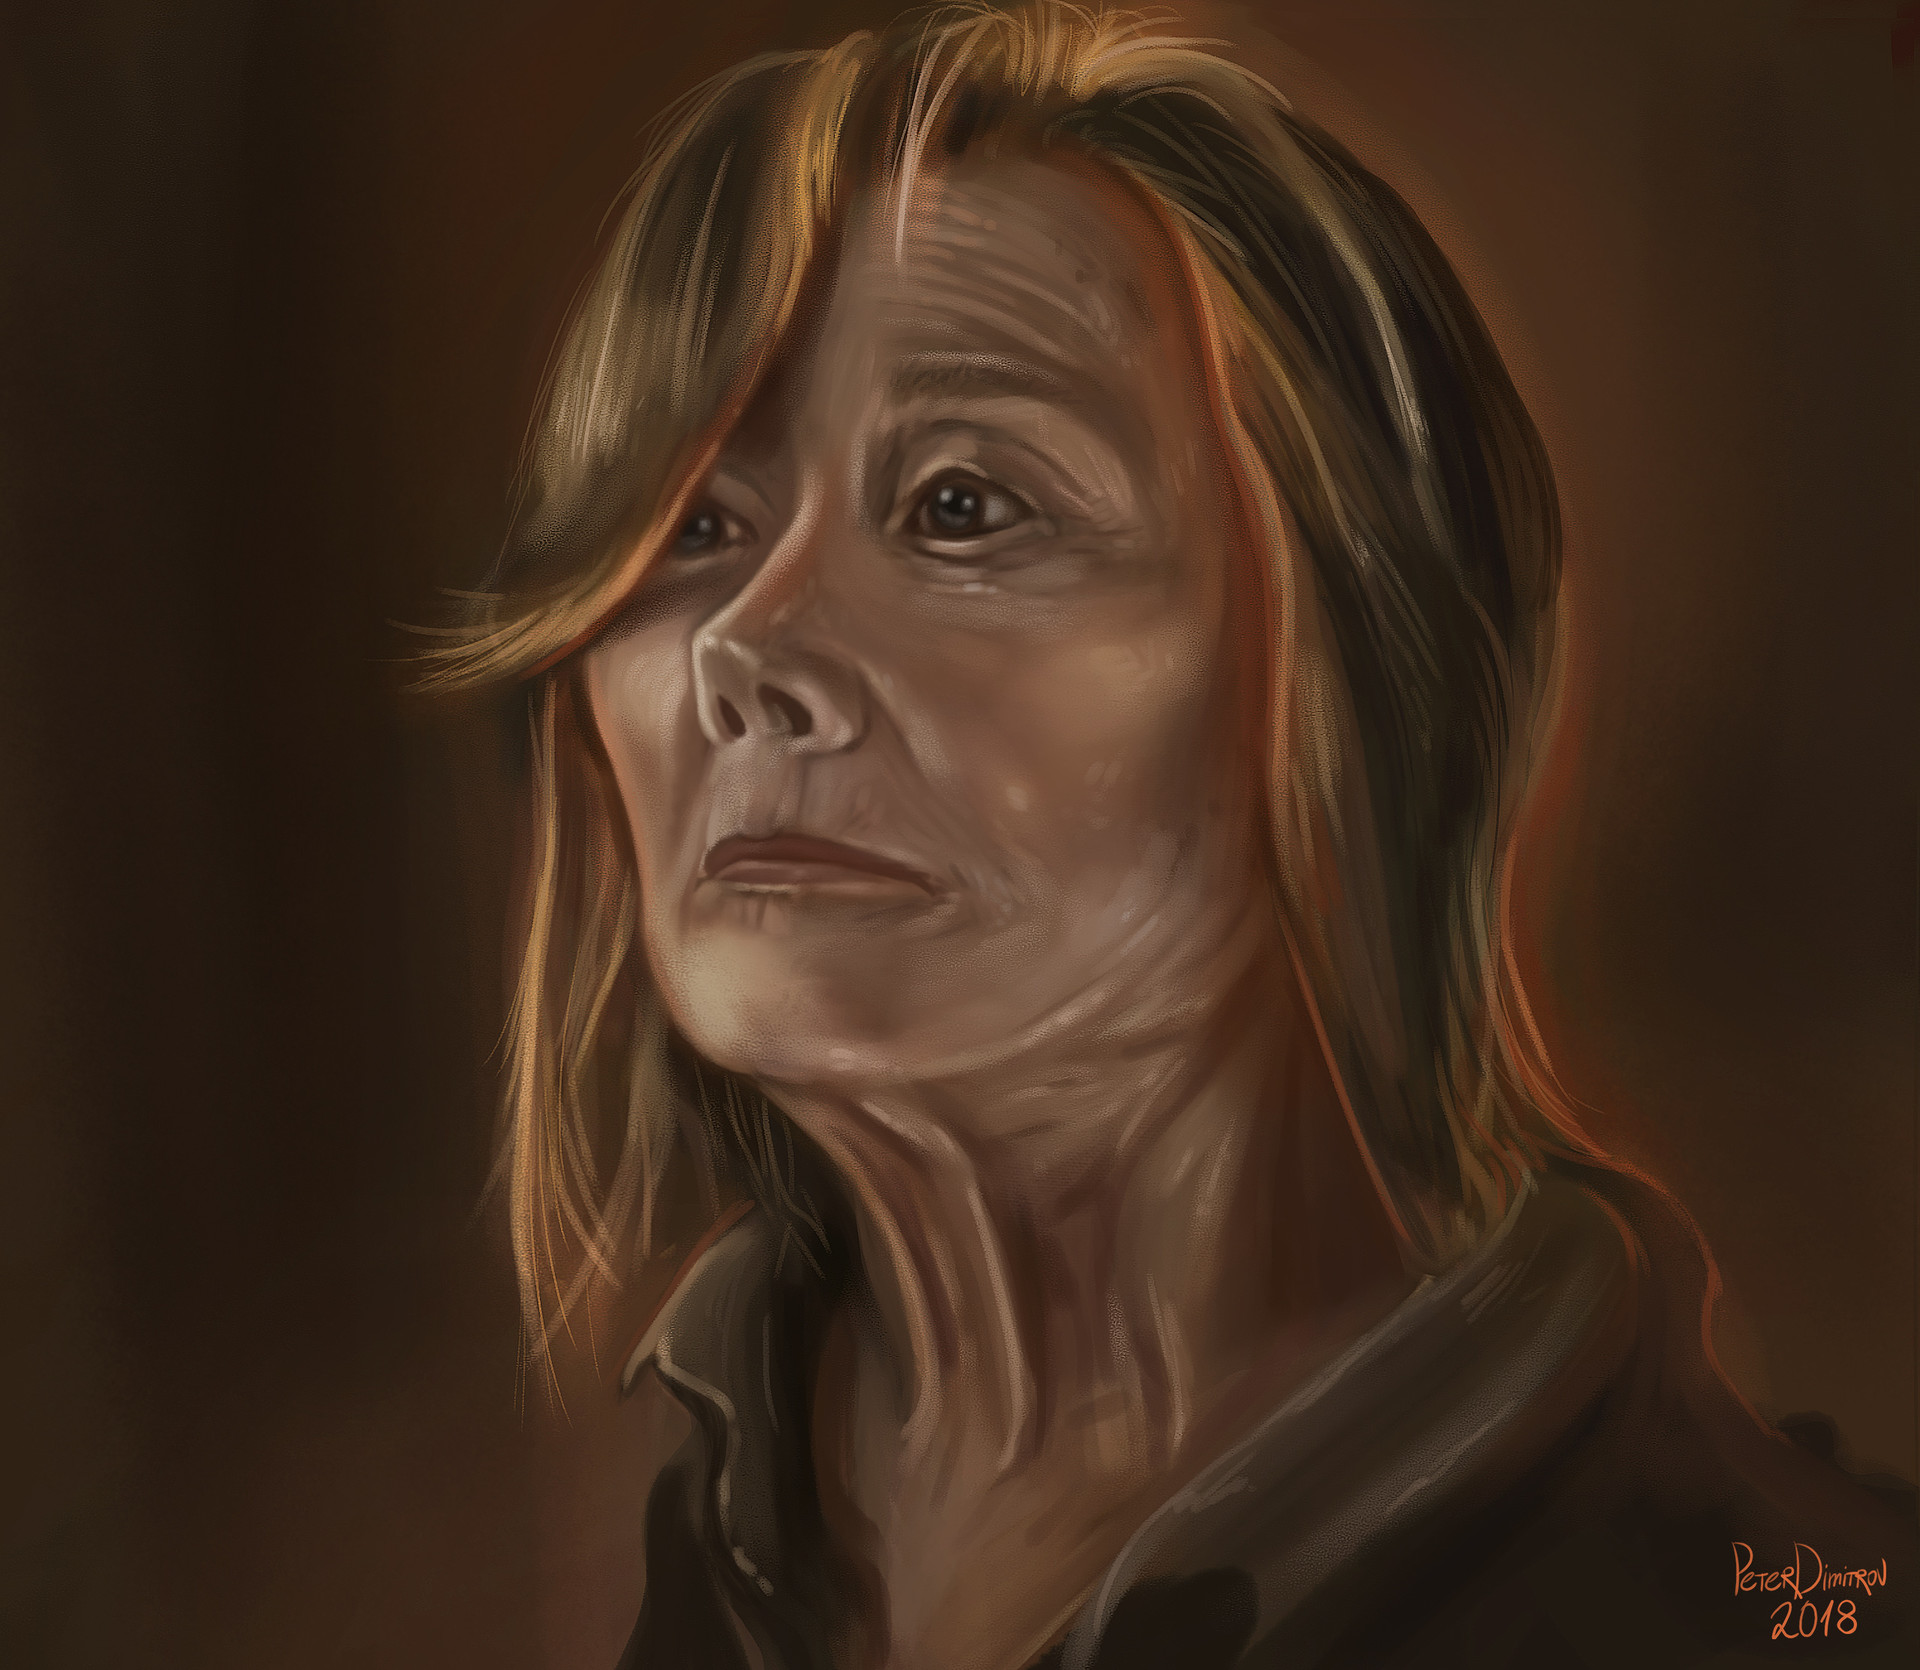 My painting study of Sissy Spacek, in the role of Ruth Deaver in Castle Rock. Ruth looking to the side with staggering orange and yellow hues all around her.